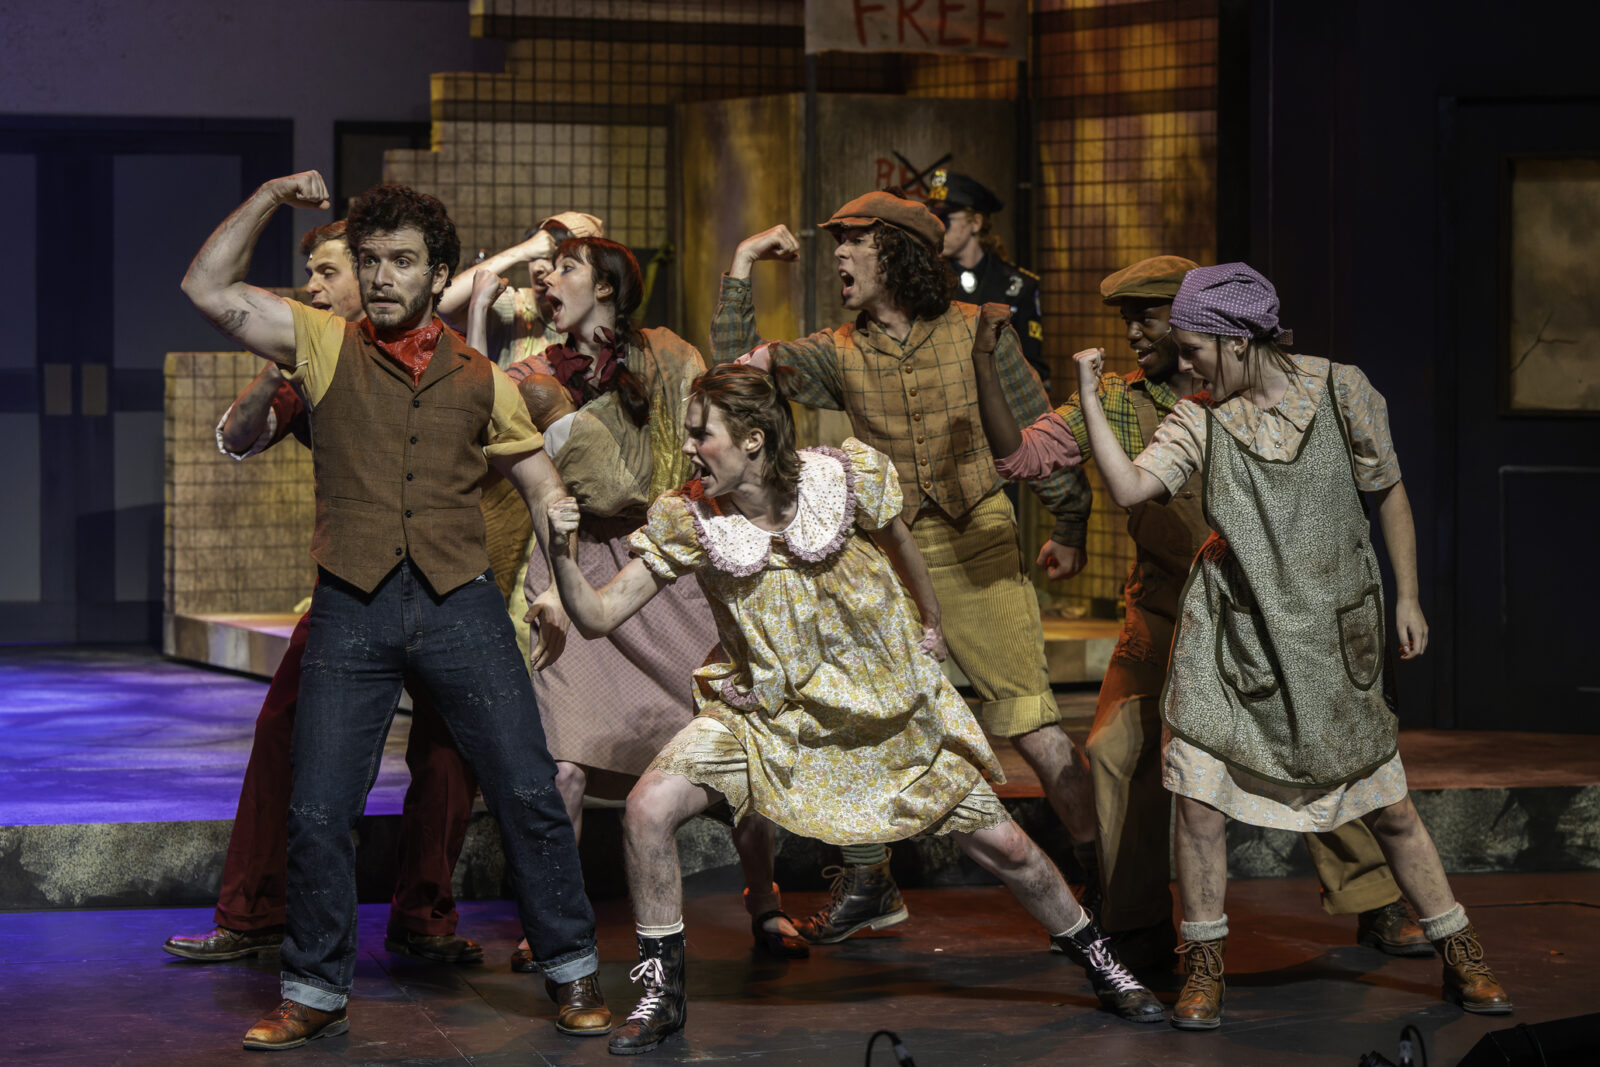 many actors on stage in a dancing pose